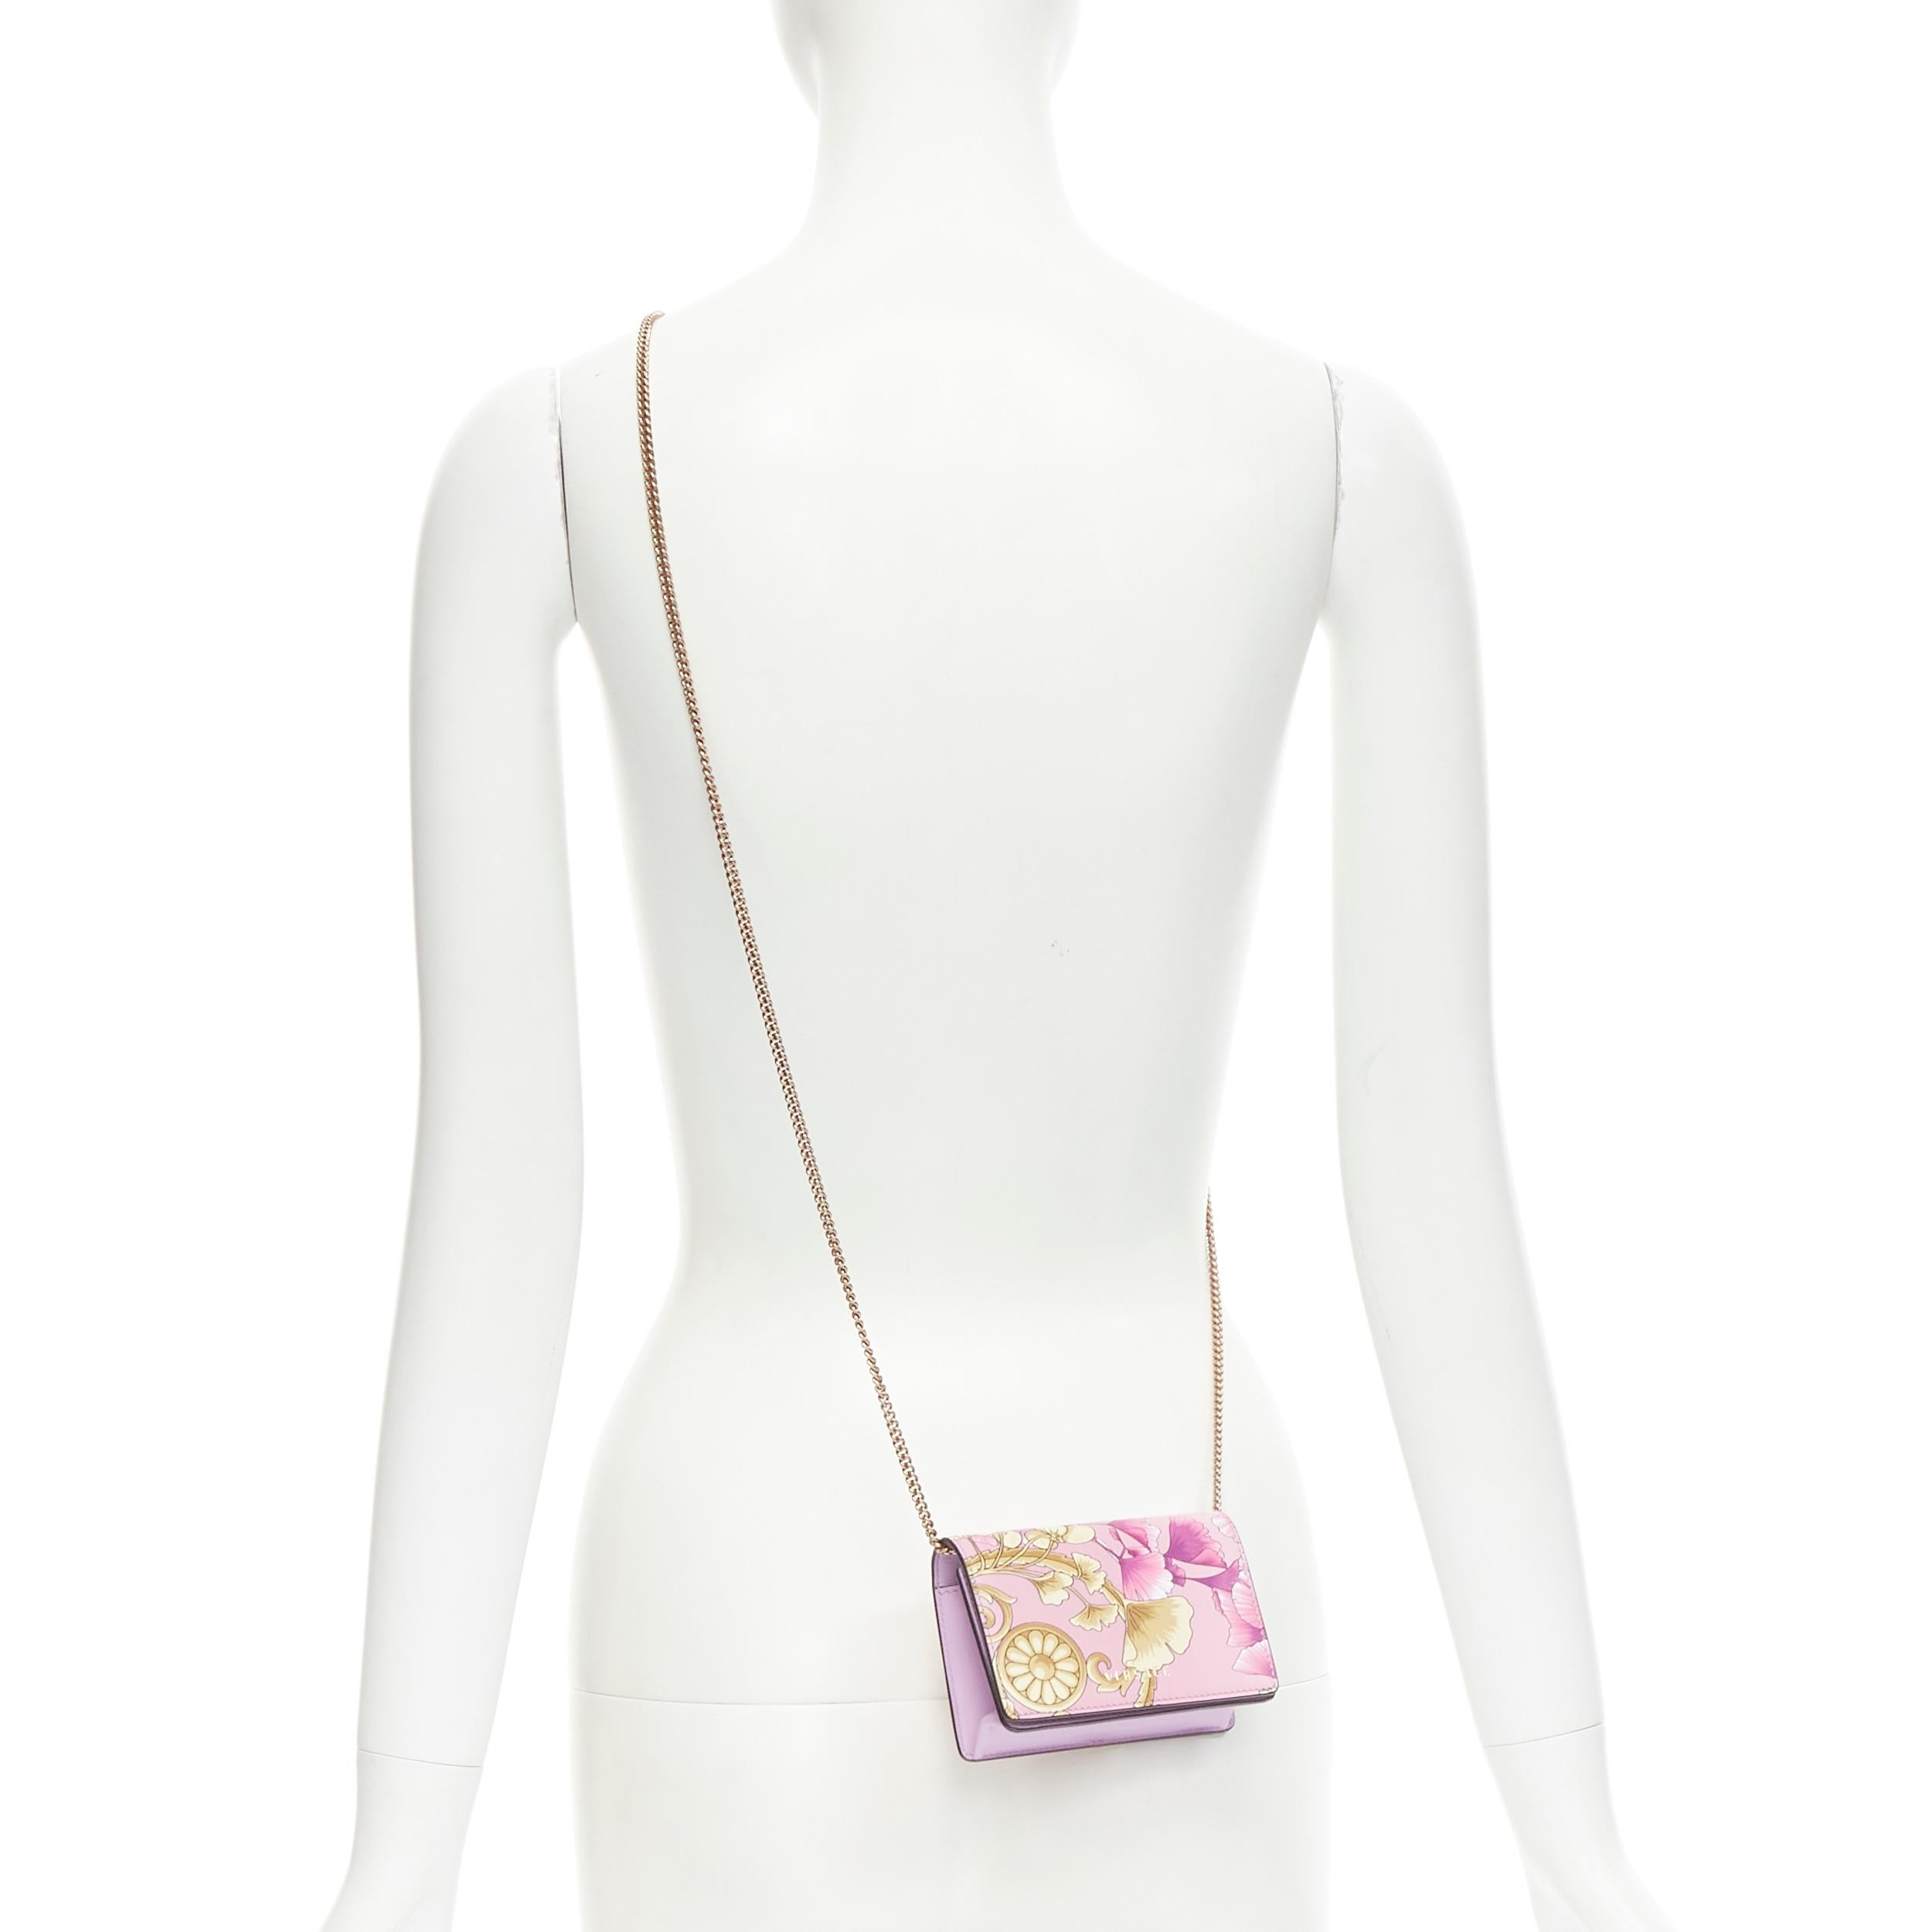 new VERSACE Gingko Barocco pink gold floral print leather crossbody micro bag 
Reference: TGAS/C00221 
Brand: Versace 
Designer: Donatella Versace 
Model: DP3H538K D3VSTG KMC6T 
Collection: Gingko Barocco 
Material: Leather 
Color: Pink 
Pattern: